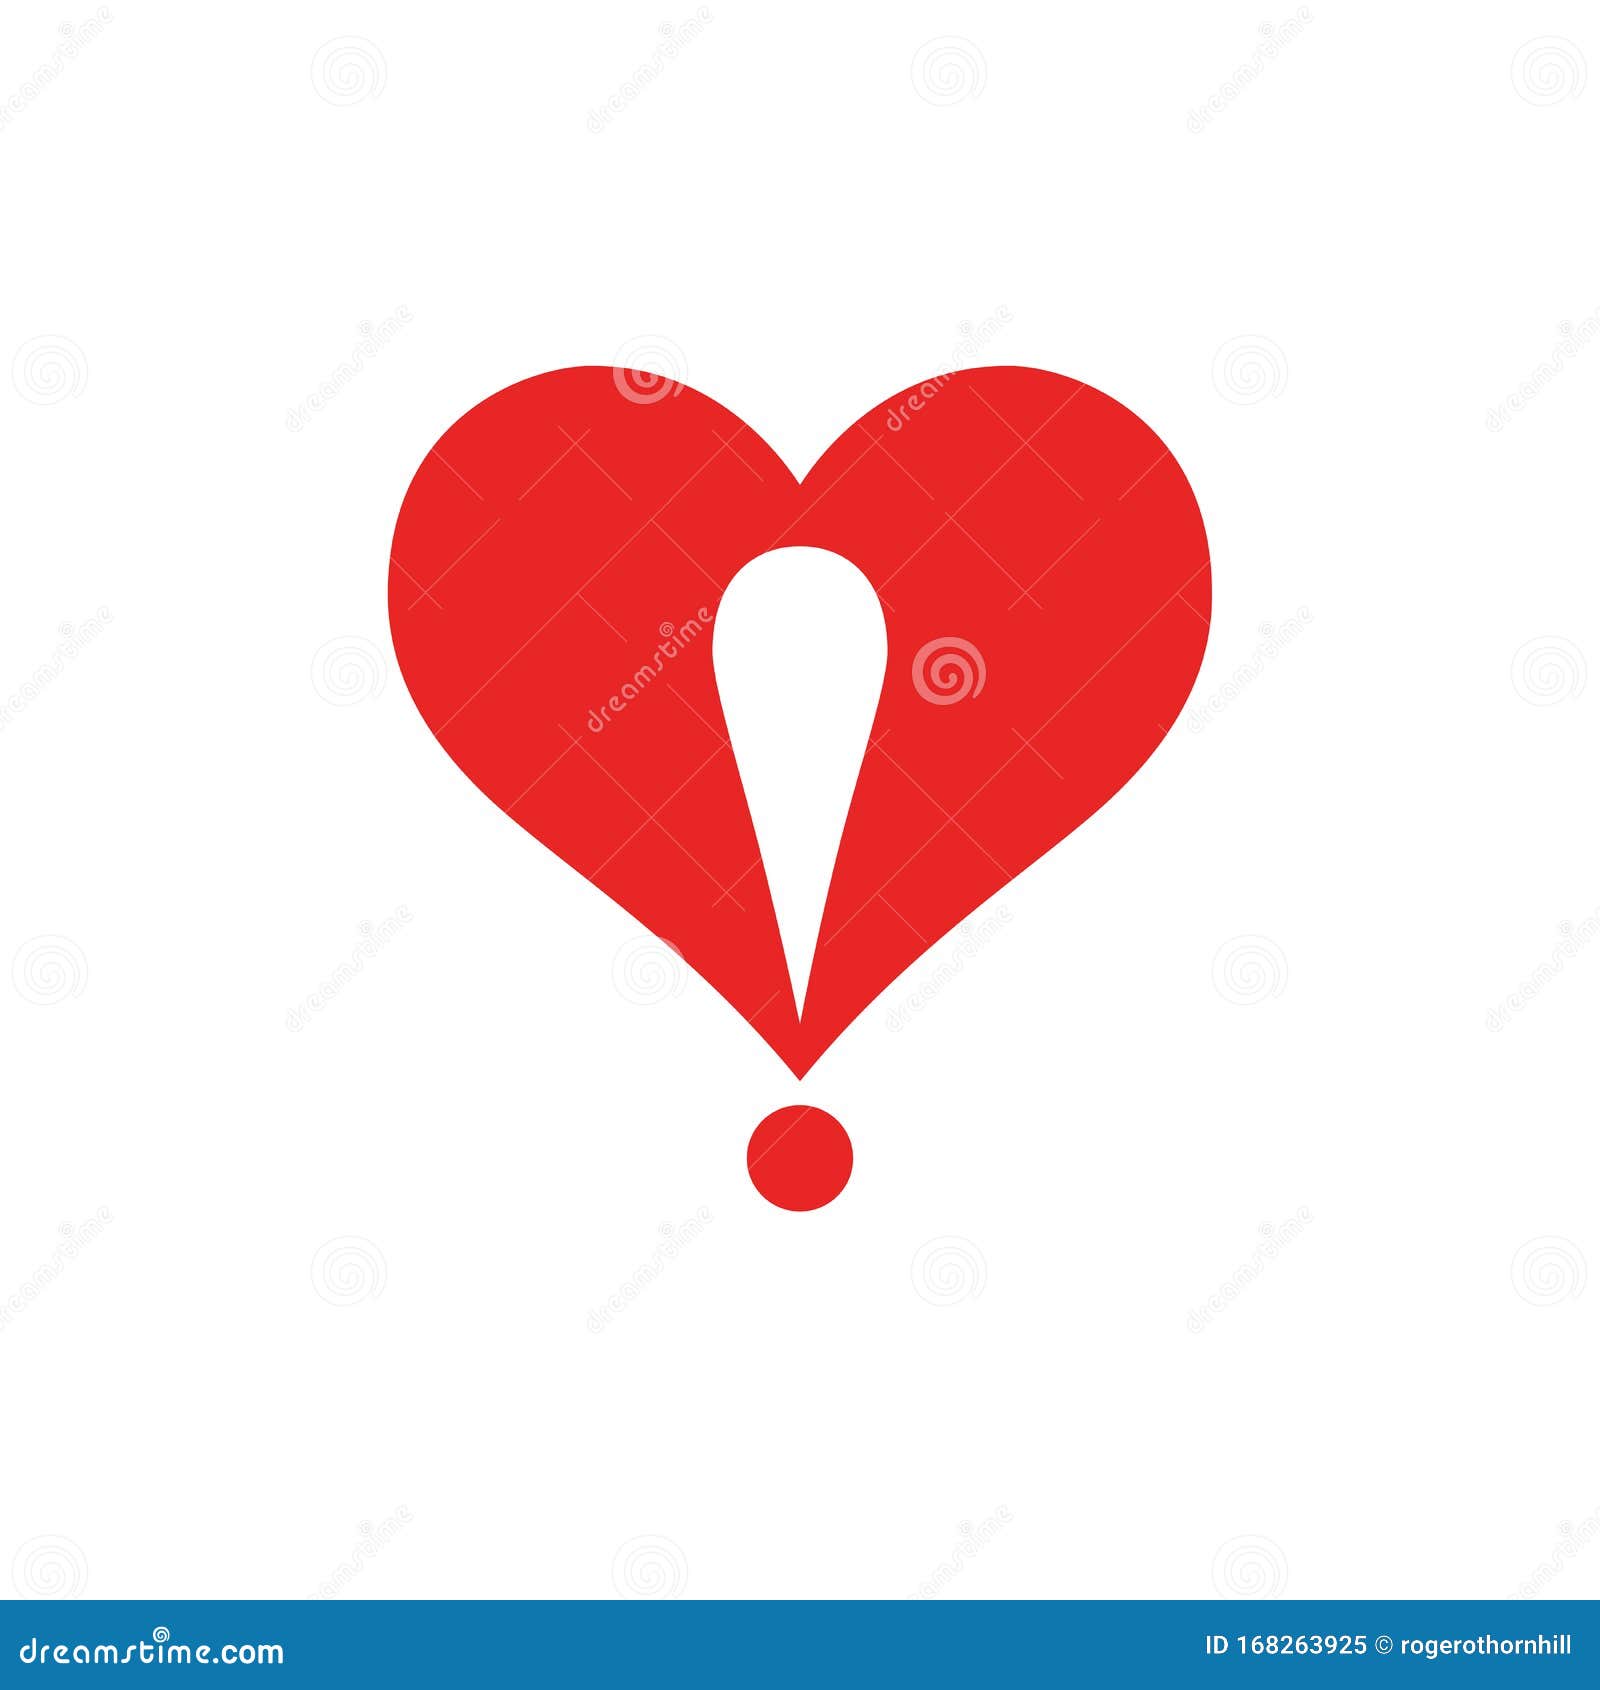 heart logo with an exclamation point incorporated into . love, dating, or valentine concept.